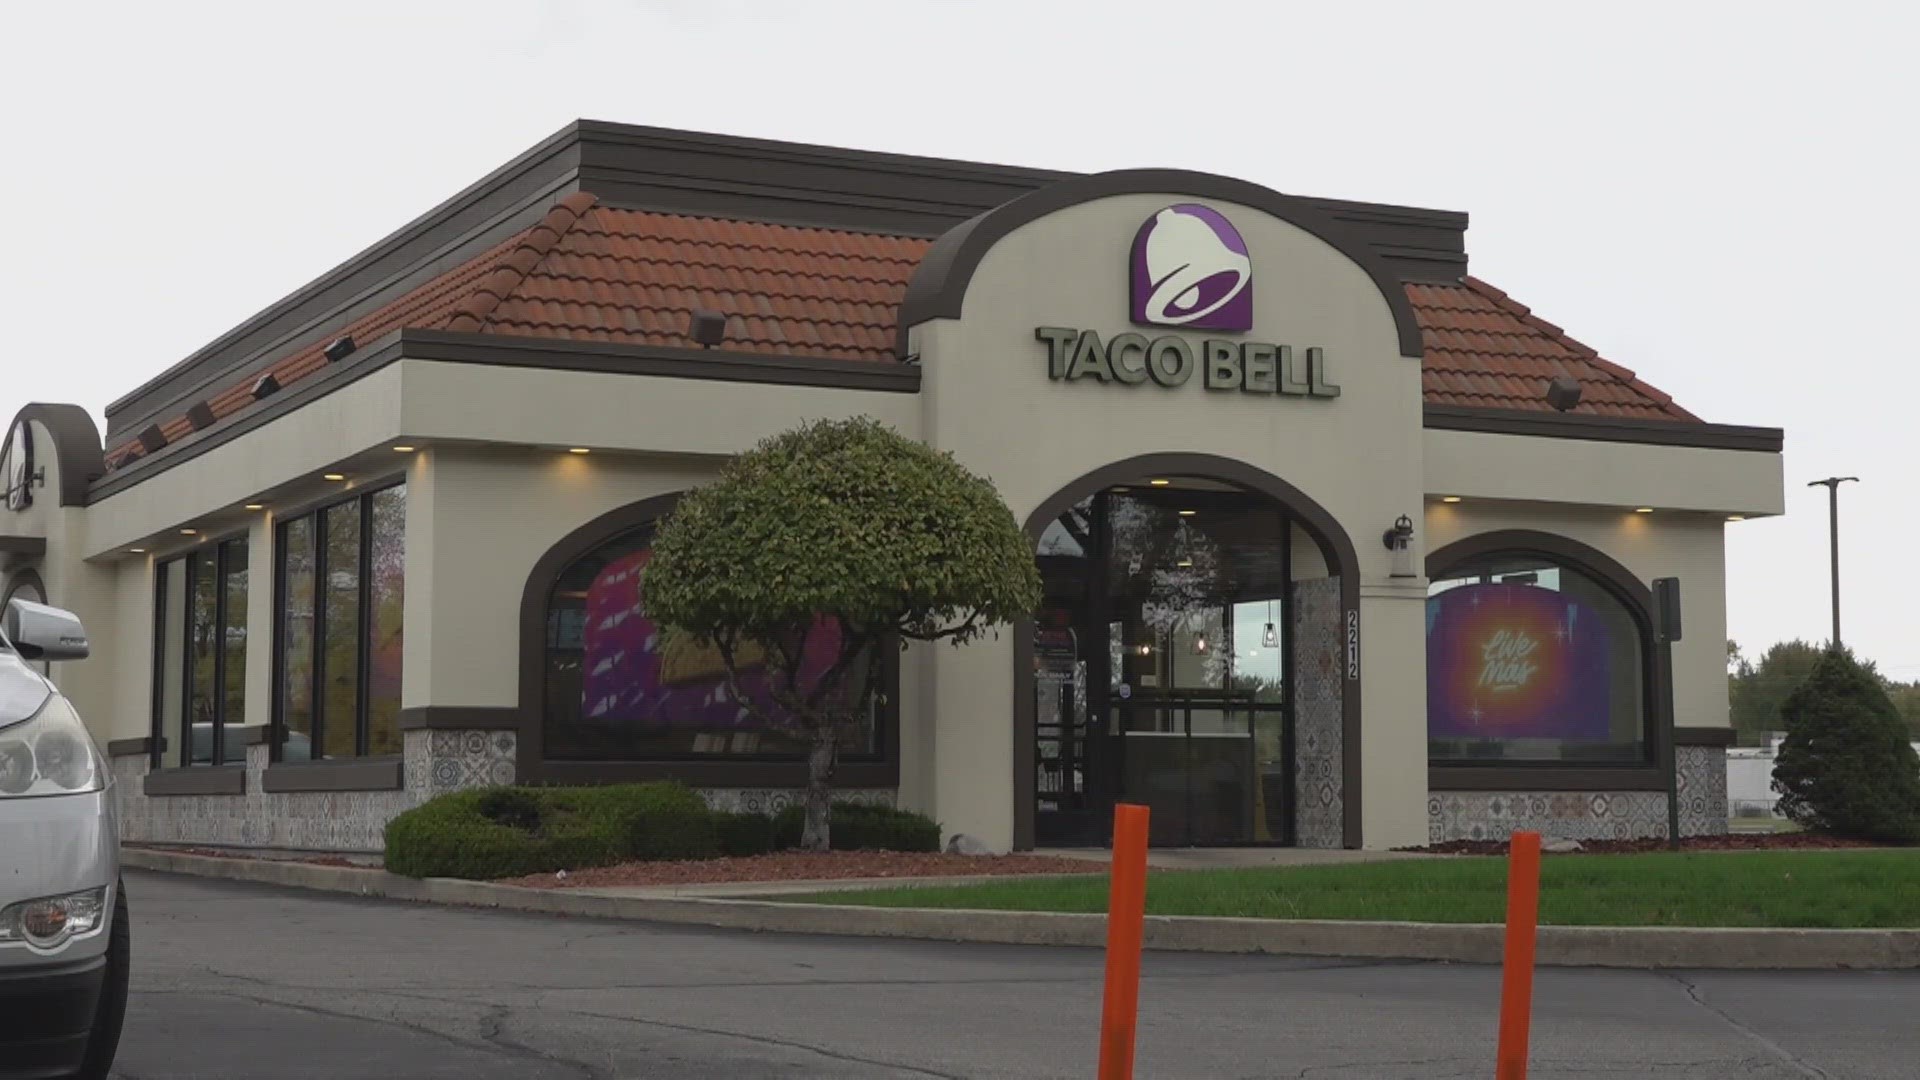 The picture of the Taco Bell manager is going viral and the health department is investigating.